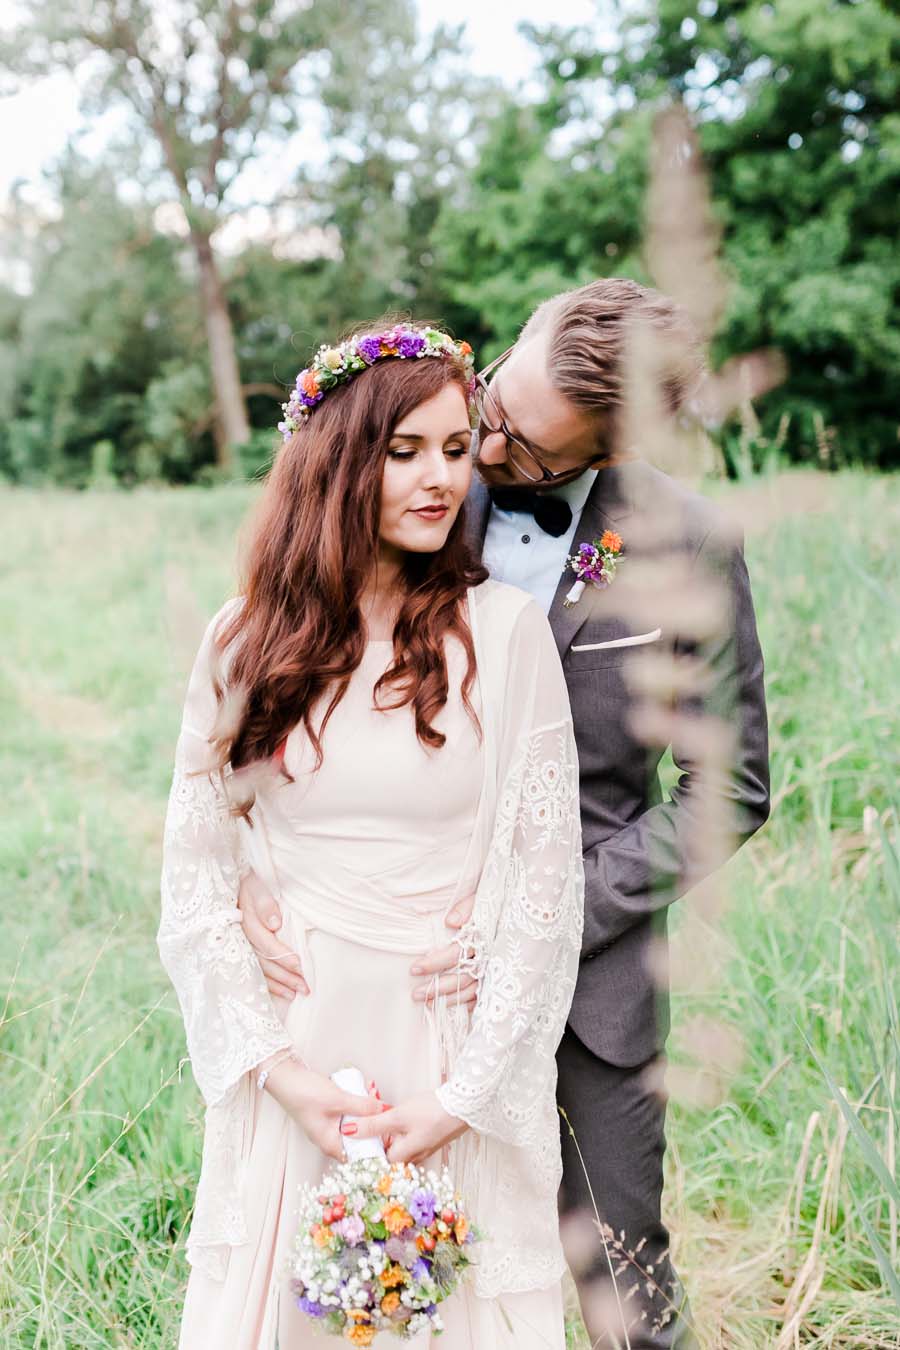 A Beautiful & Colourful Love Shoot in Nature! Afet & Sebastian